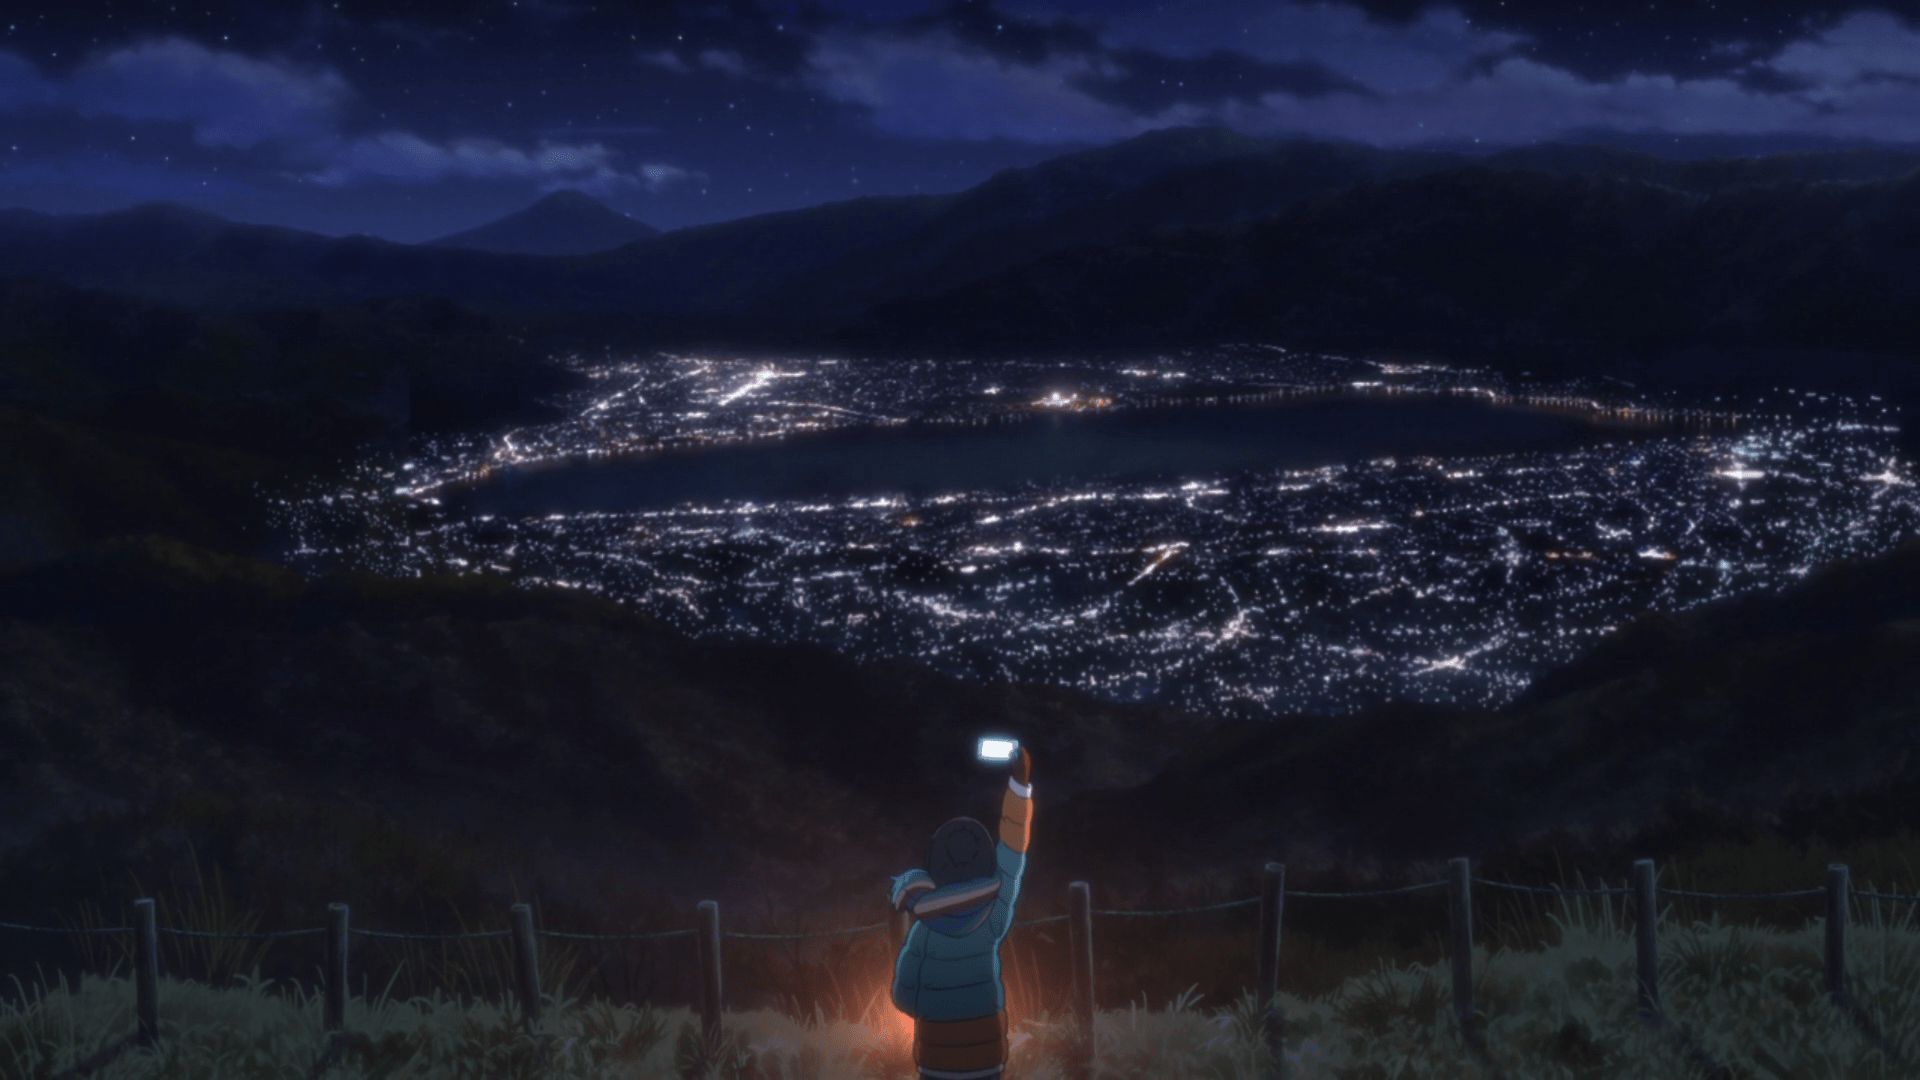 A person holding a cellphone in the air, with a city in the background. - Camping